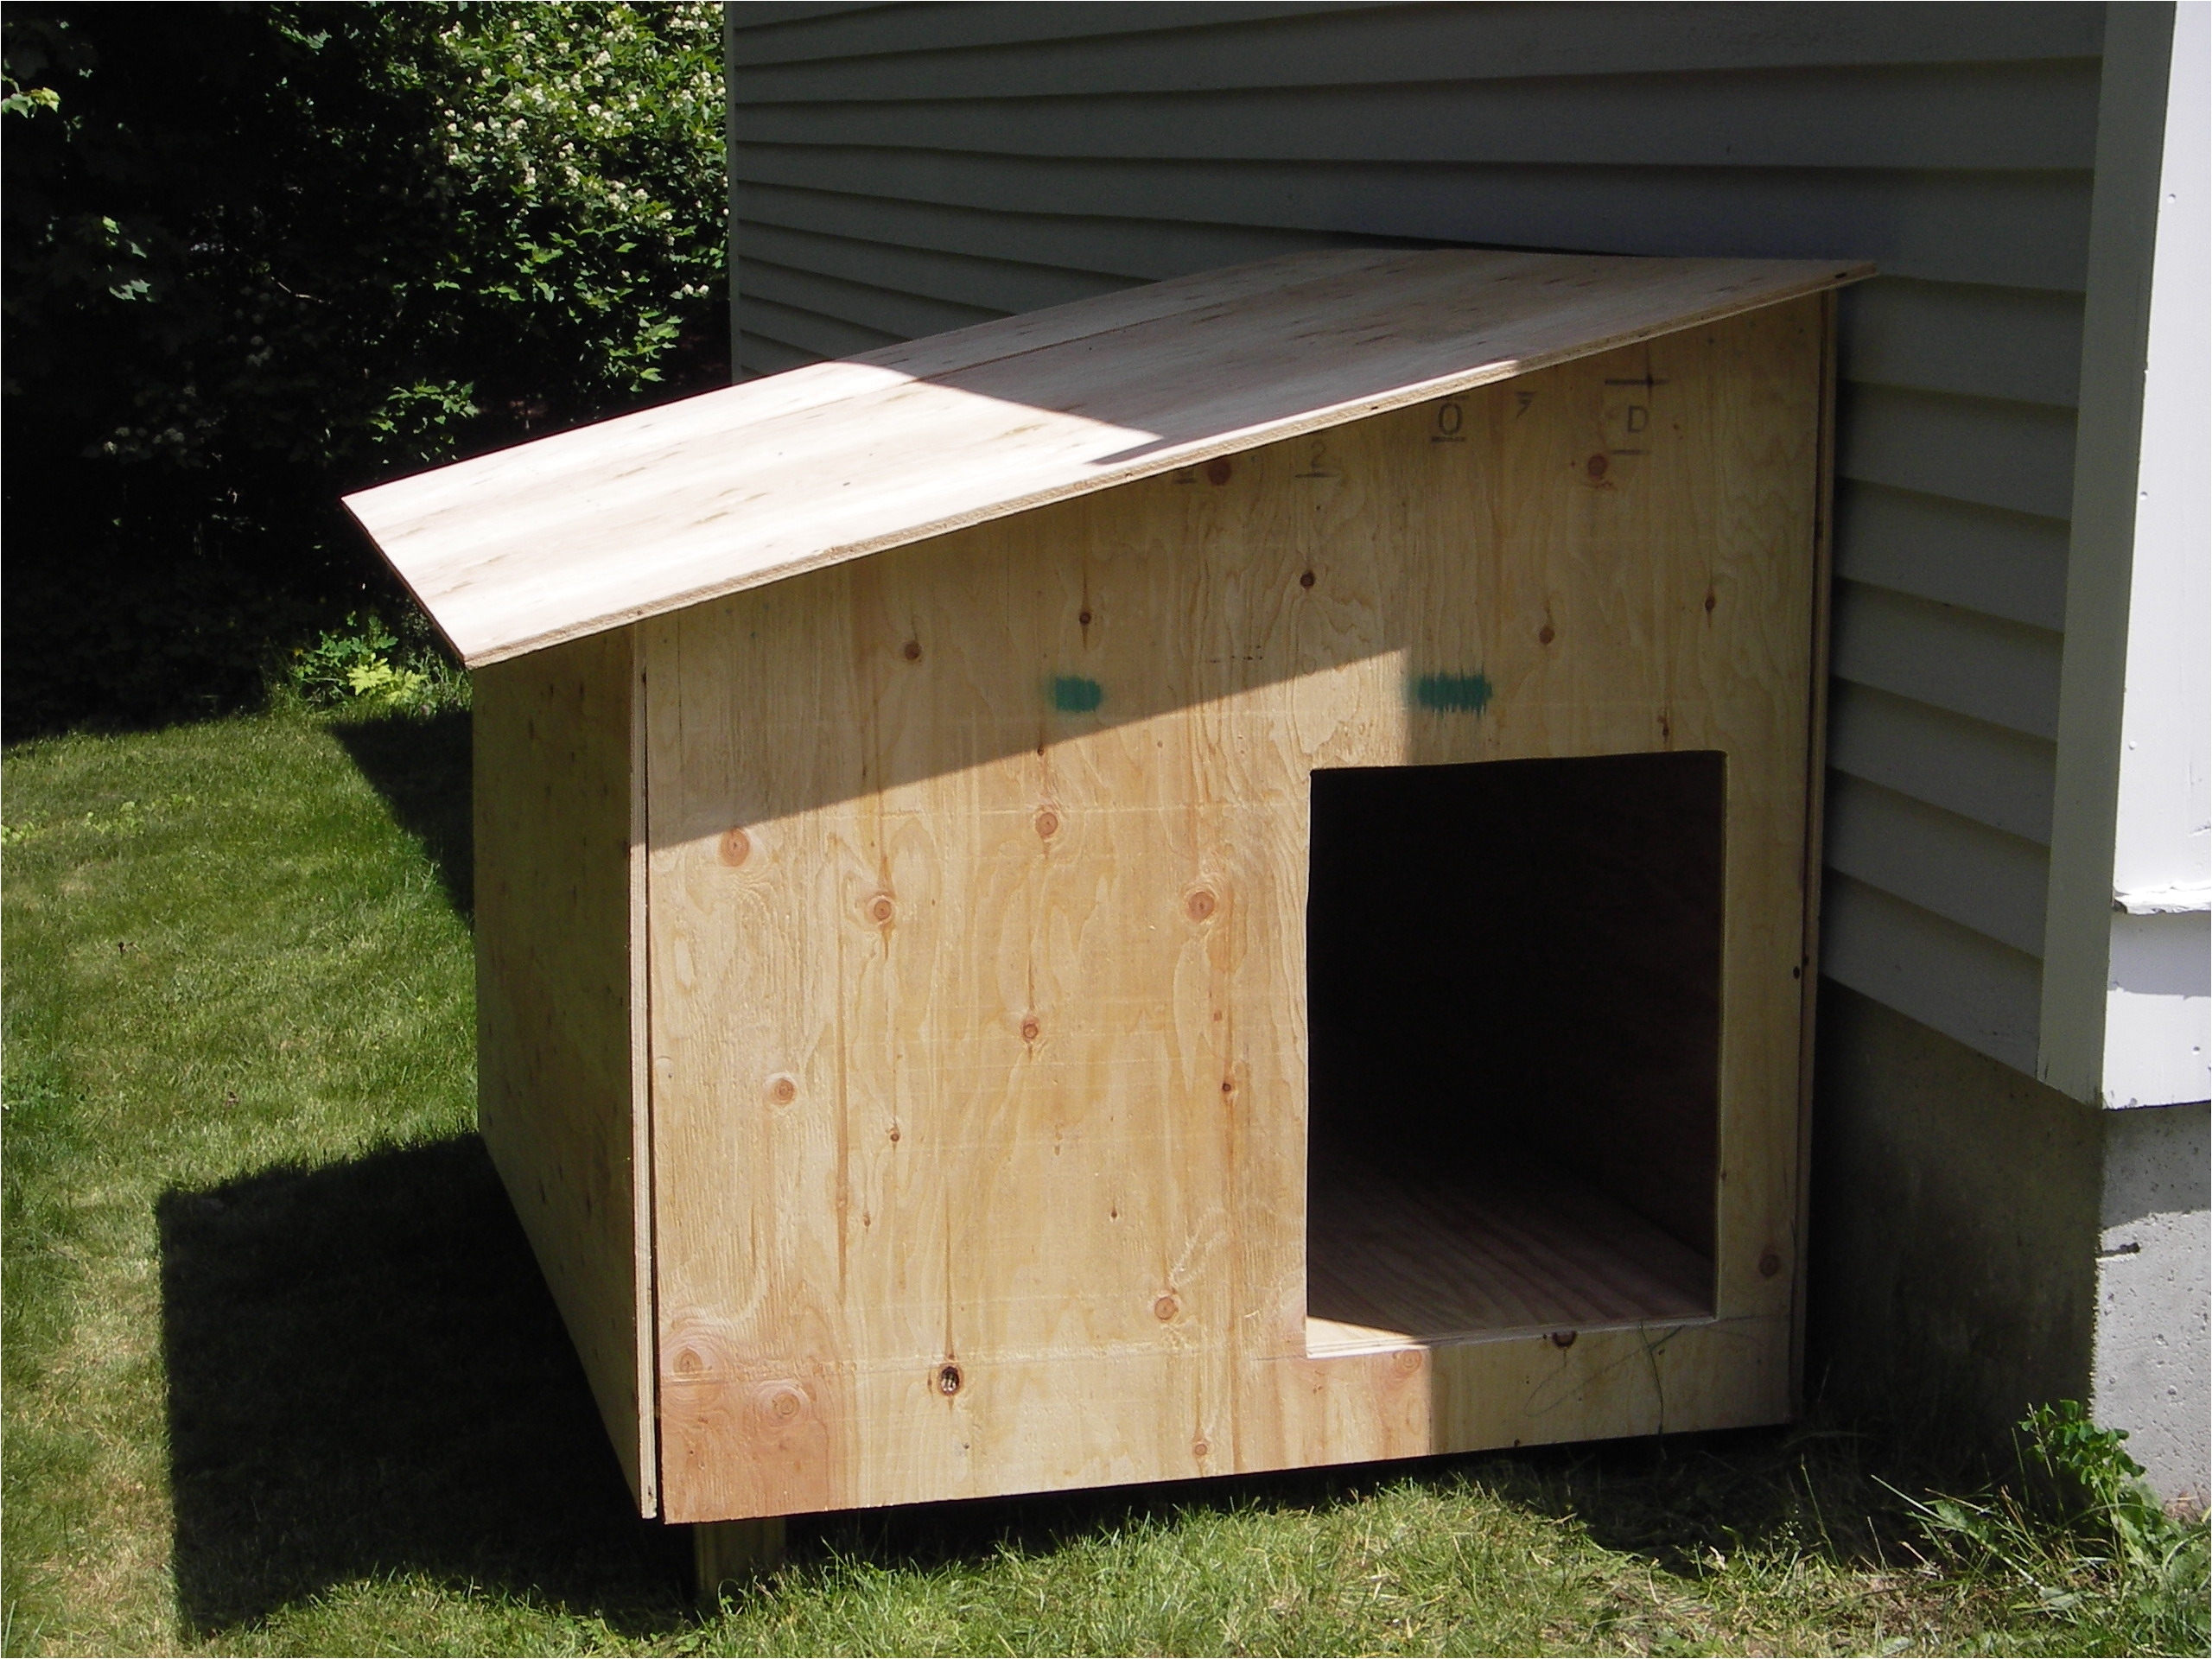 insulated dog house plans cool dog house plans simple small adorable nice wonderful idea with